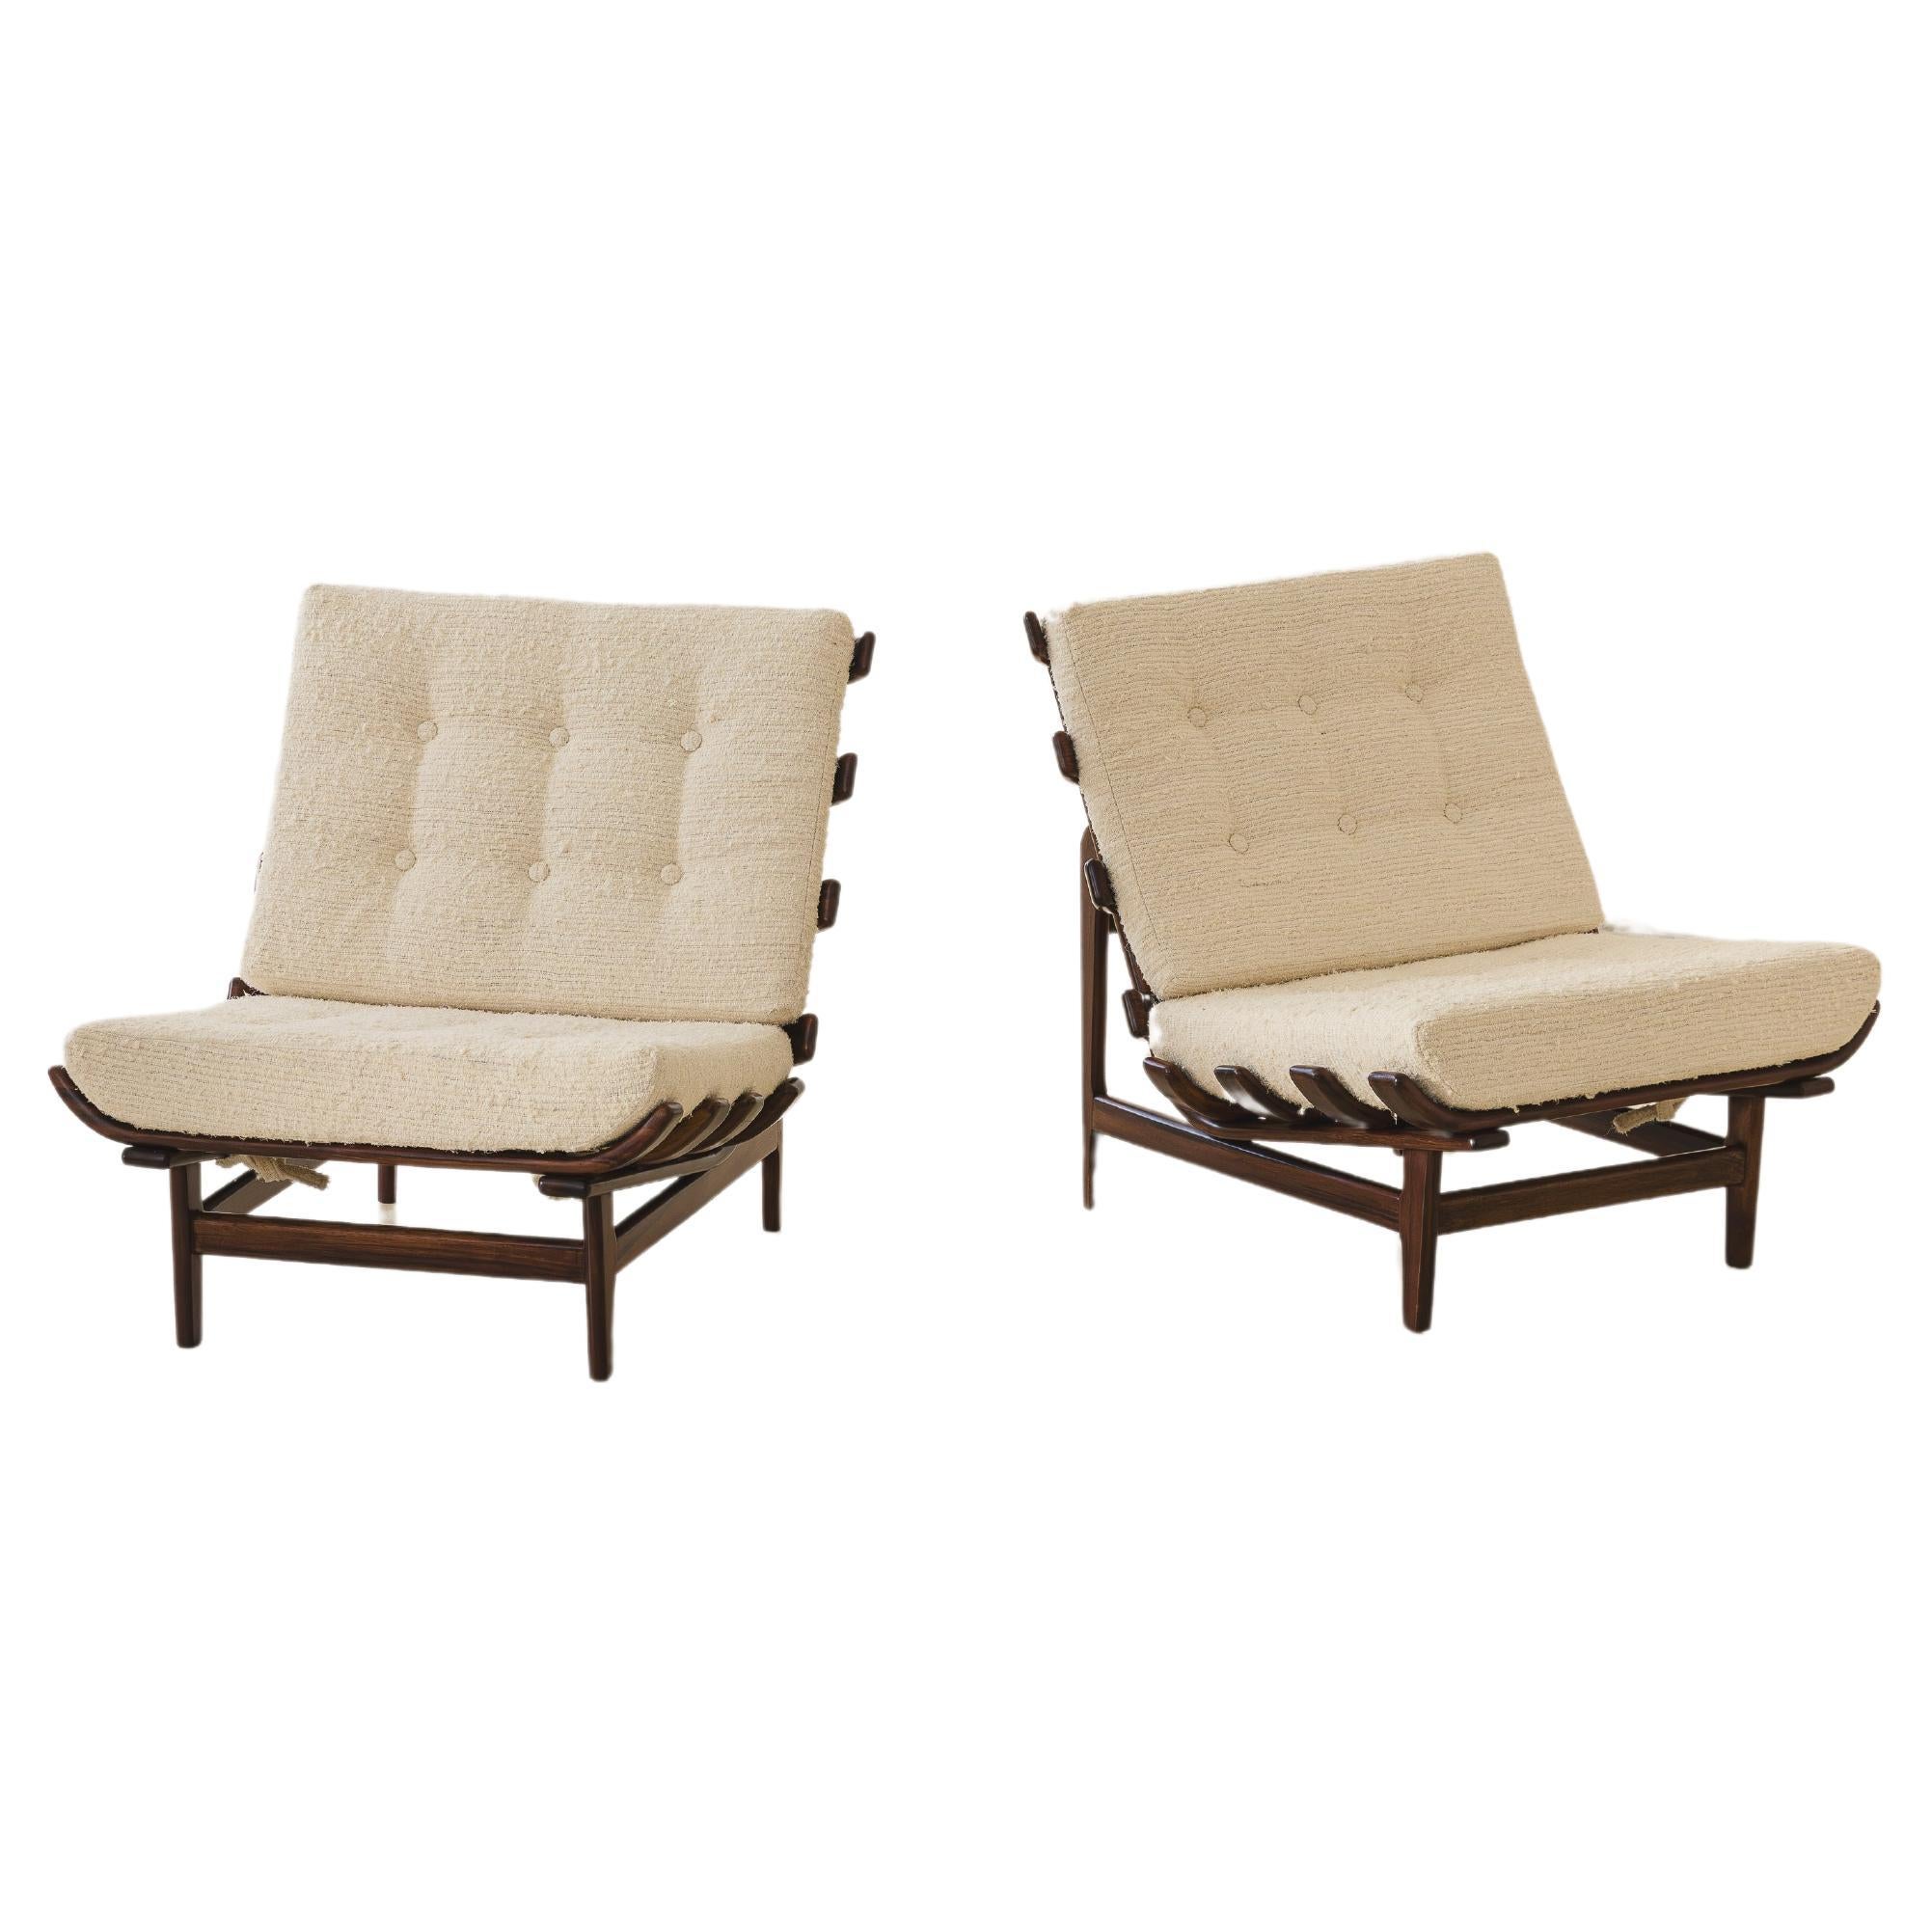 Pair of Armchairs by Móveis de Madeira Pailar, 1960s For Sale